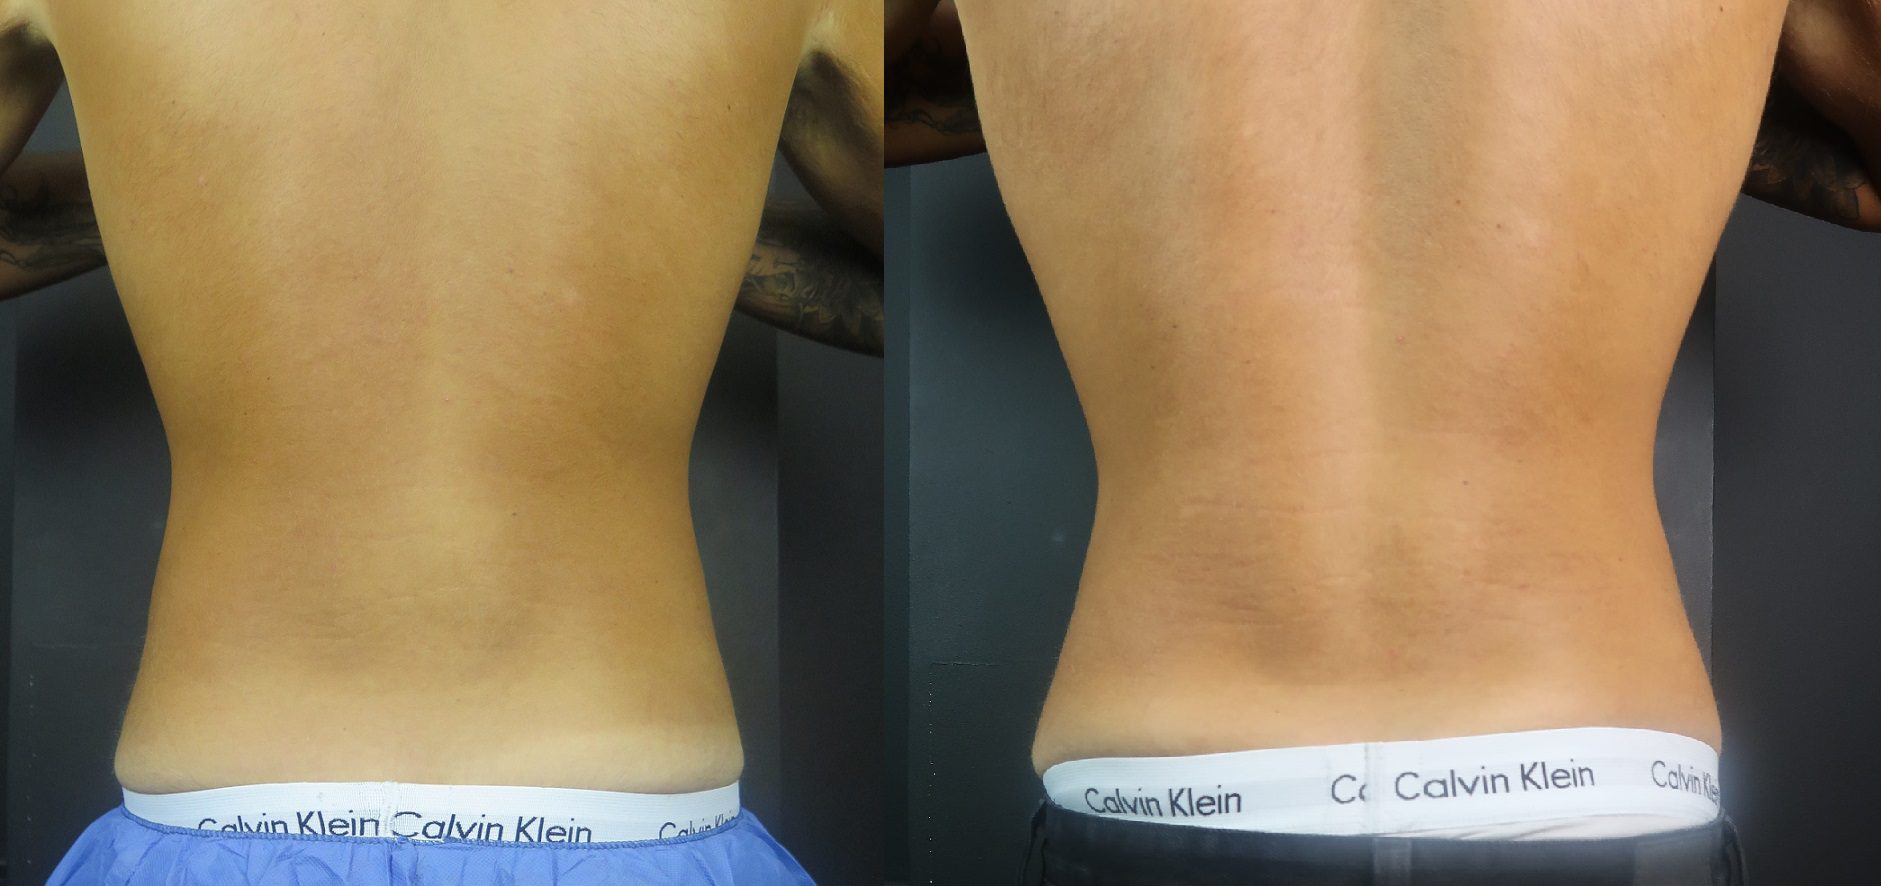 coolsculpting flanks before and after